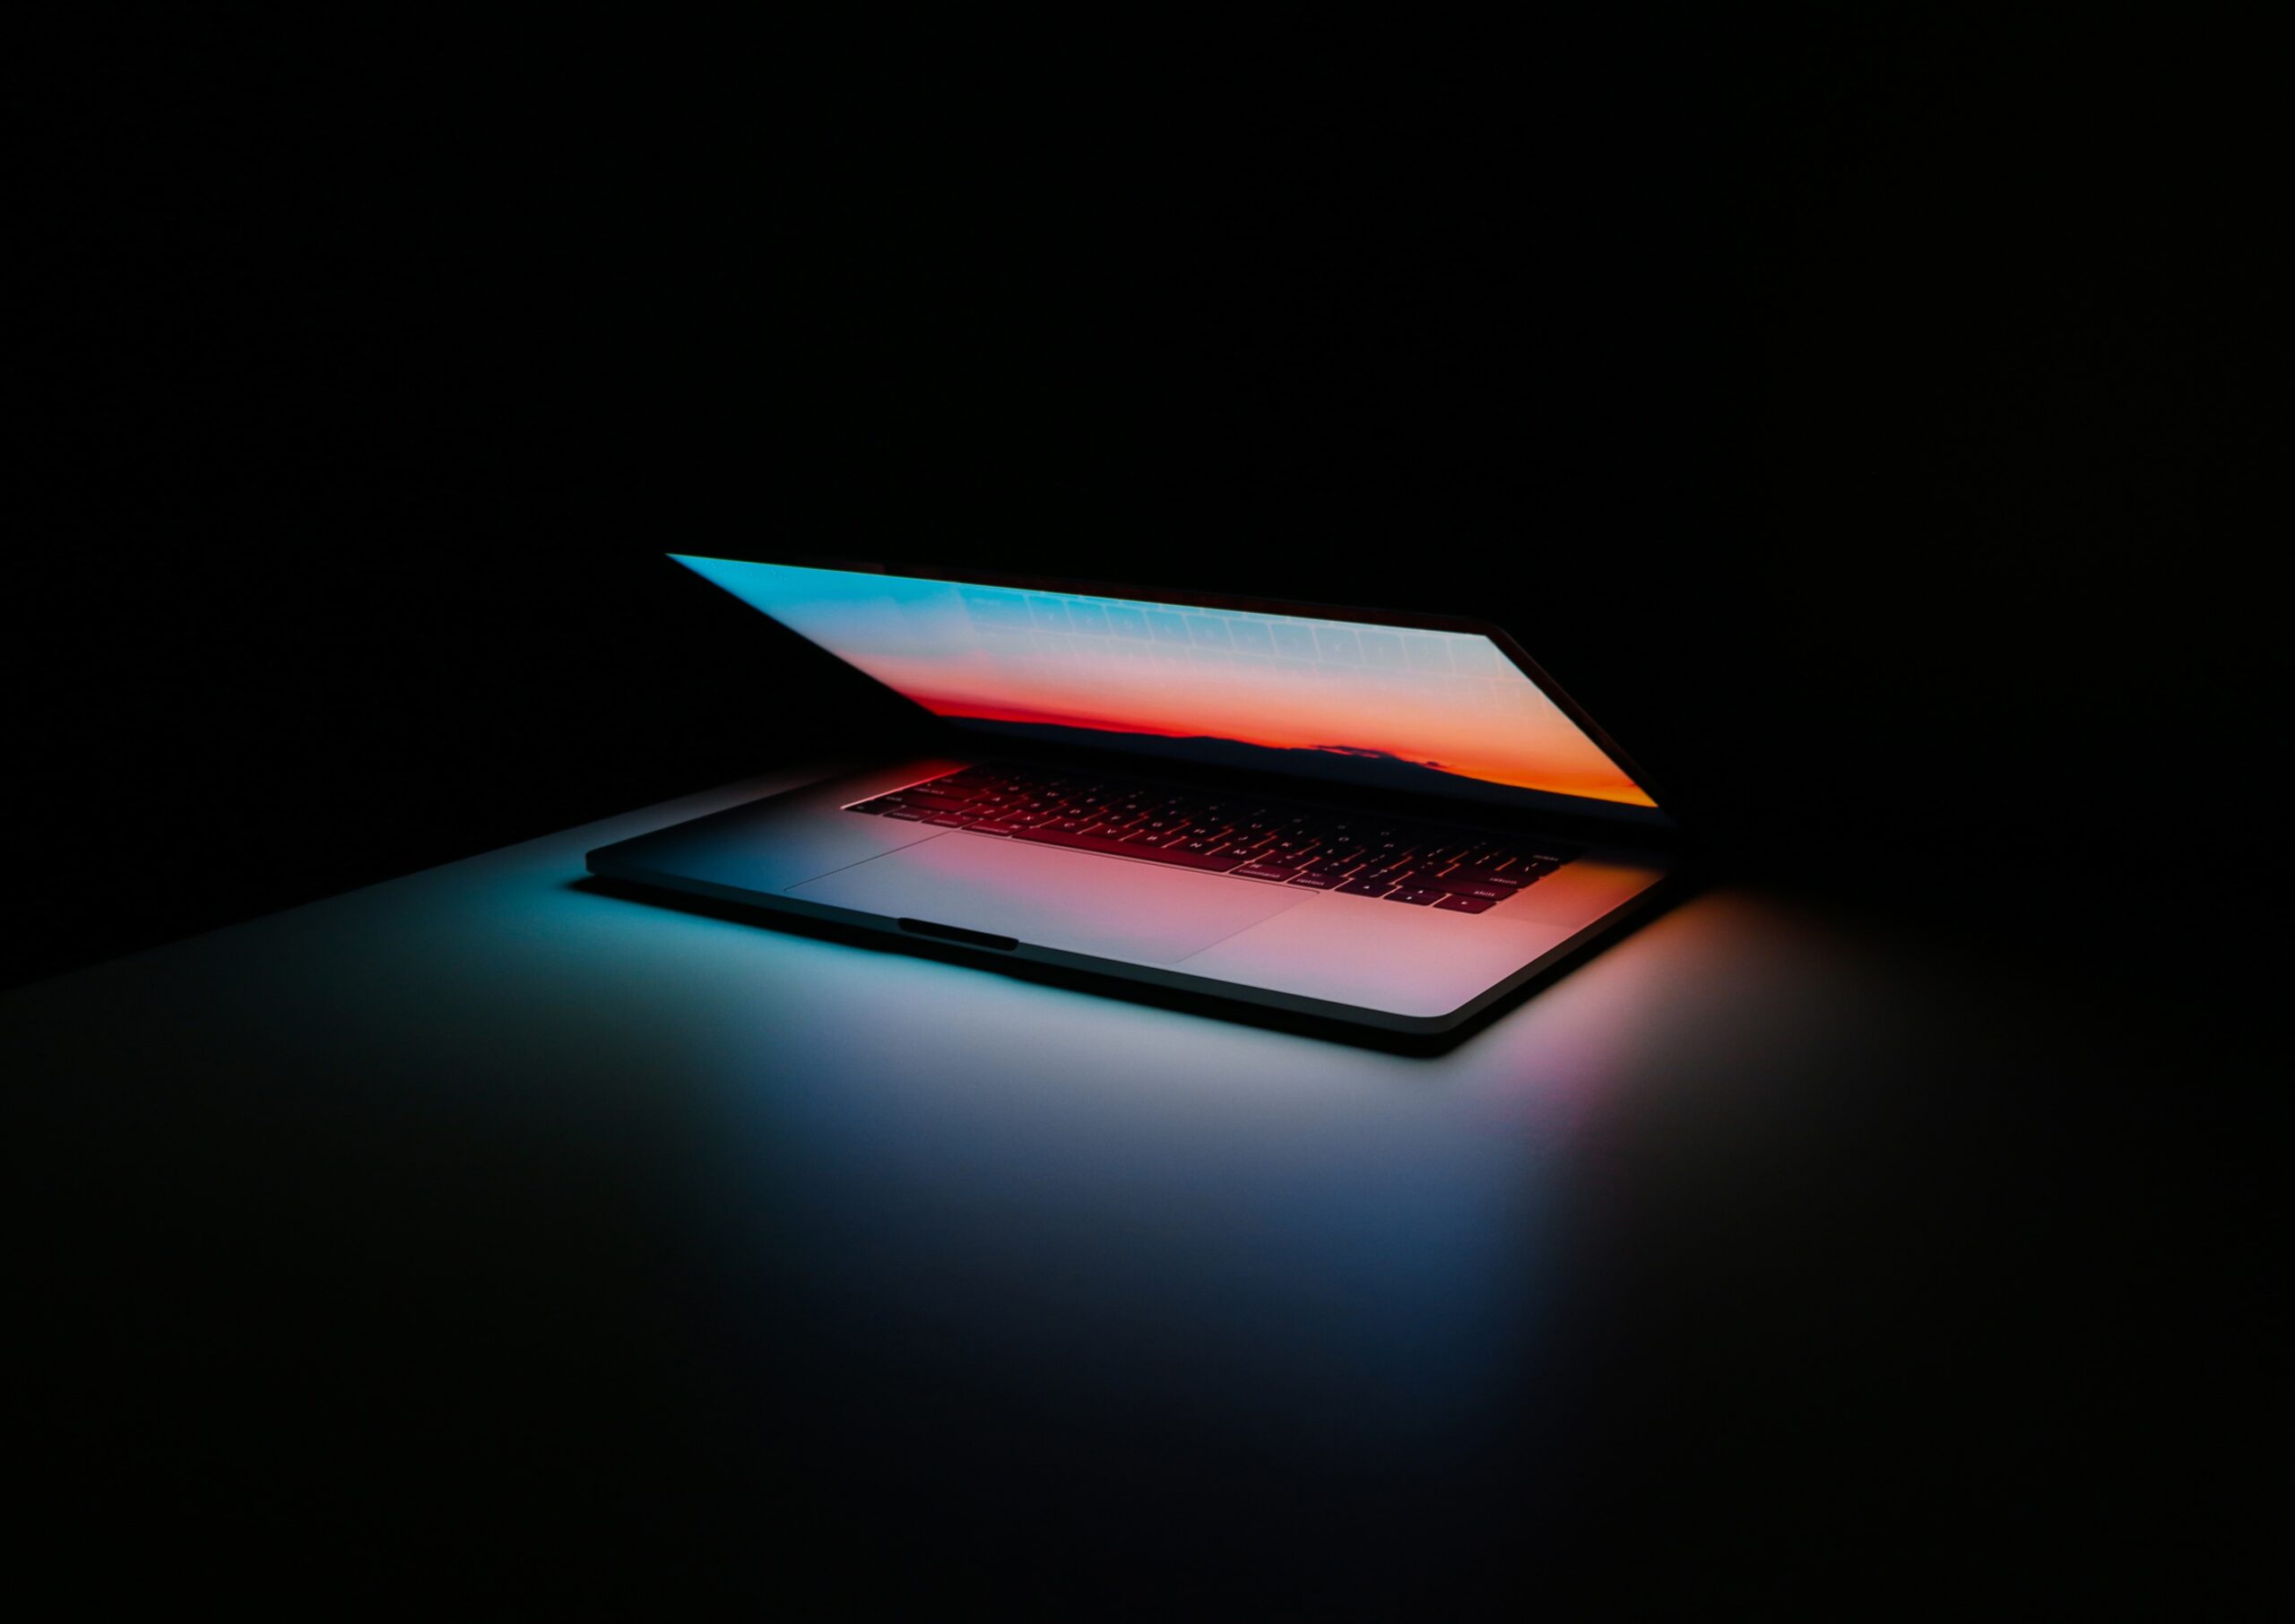 A partially-closed laptop with a gradient background.